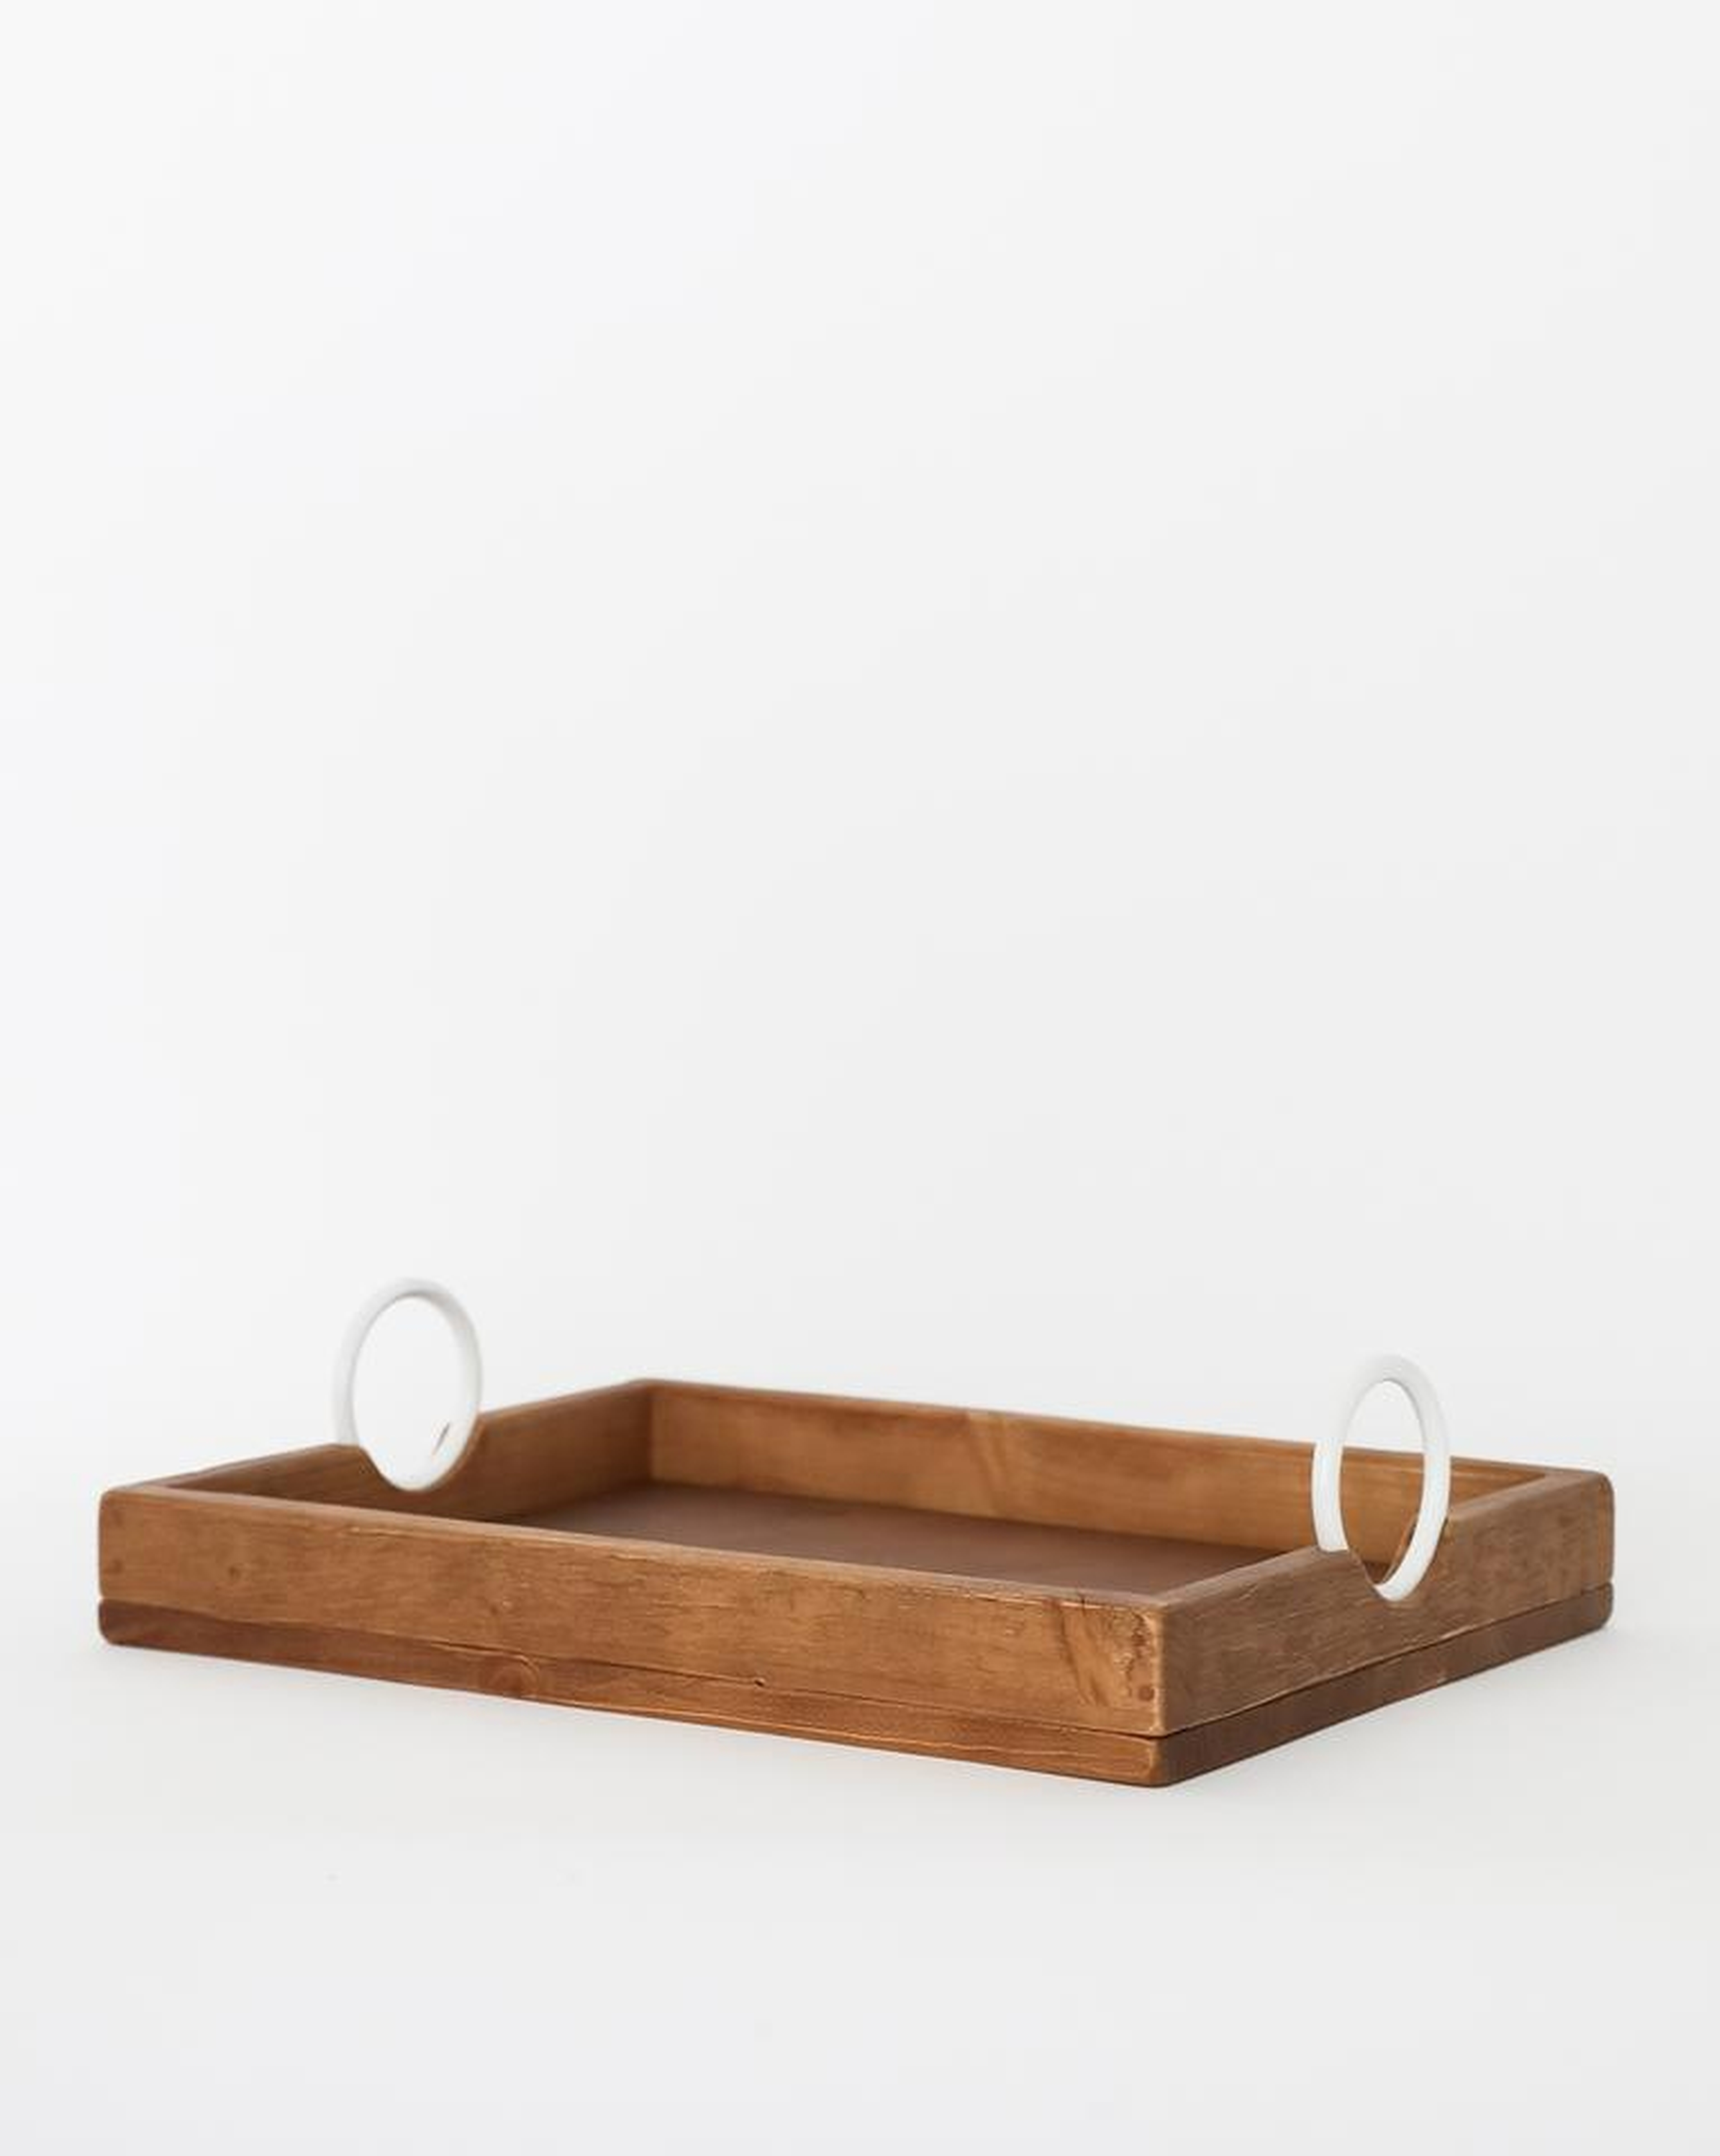 RUSTIC SERVING TRAY - McGee & Co.